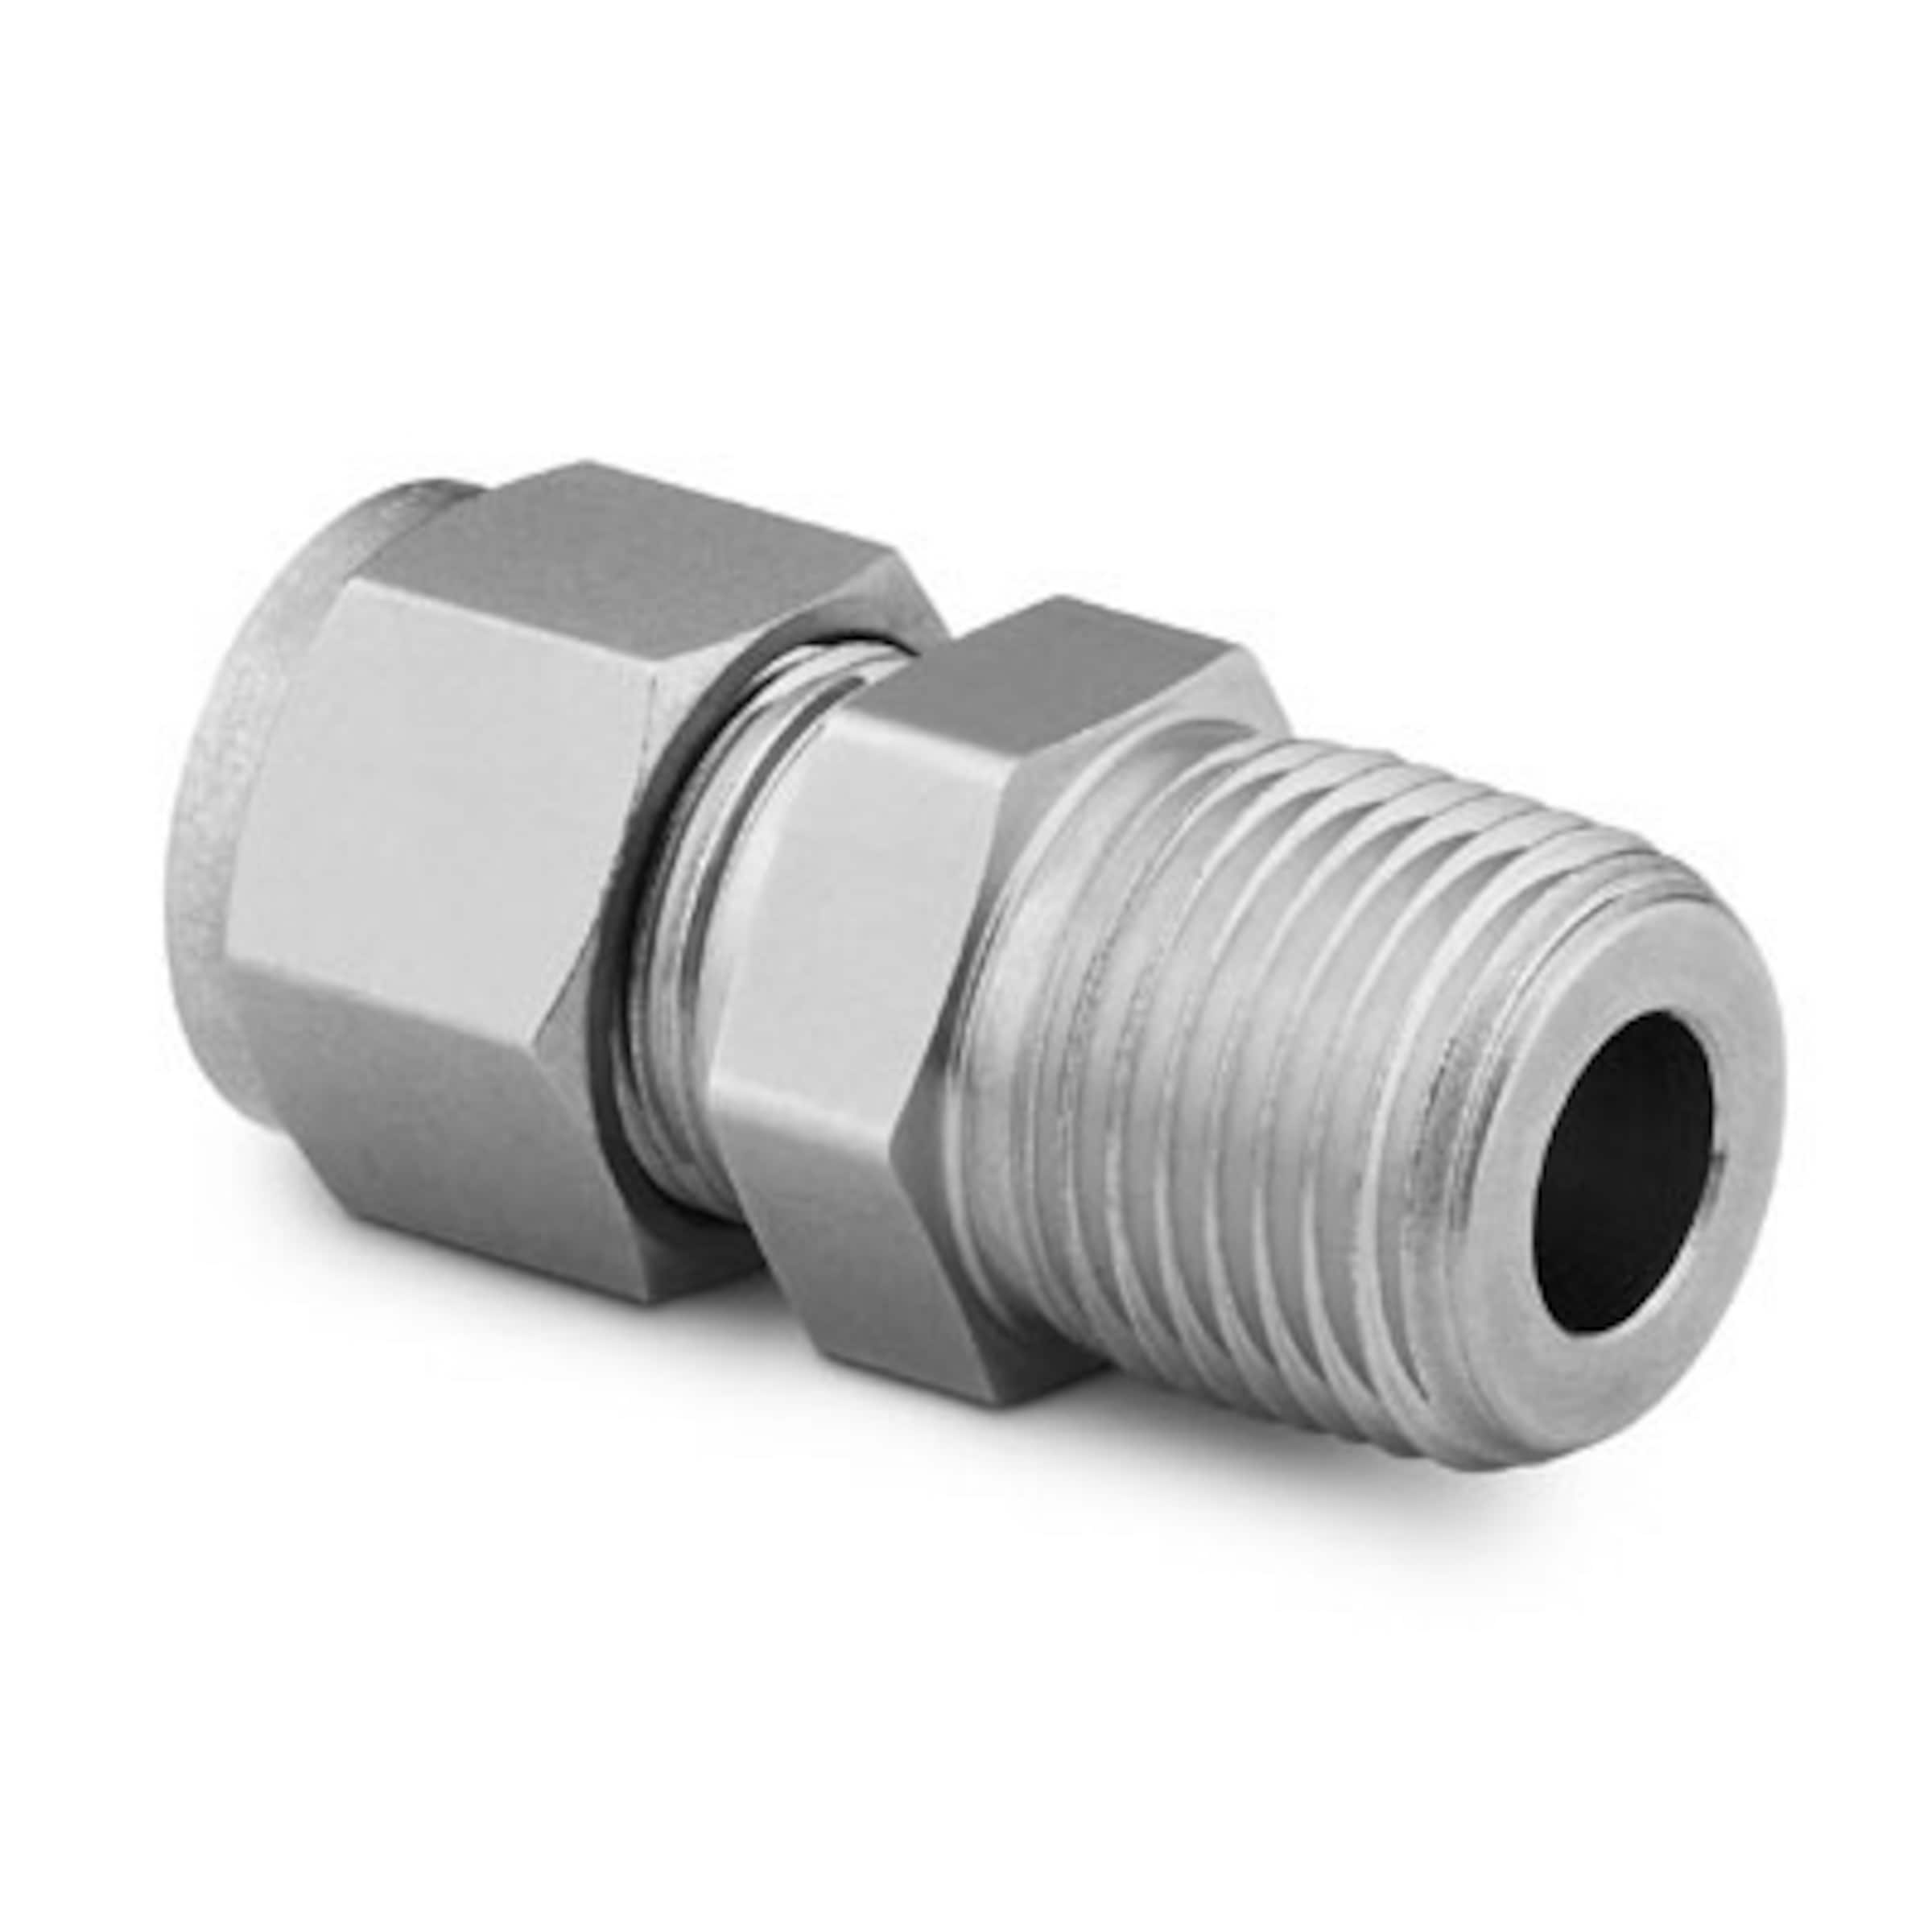 Xucus Tube Fittings & Pipe Fittings 316 SS Inserts for Soft Plastic tubing Color: Silver, Thread Specification: SS-815-6 can Combination with Swagelok - 